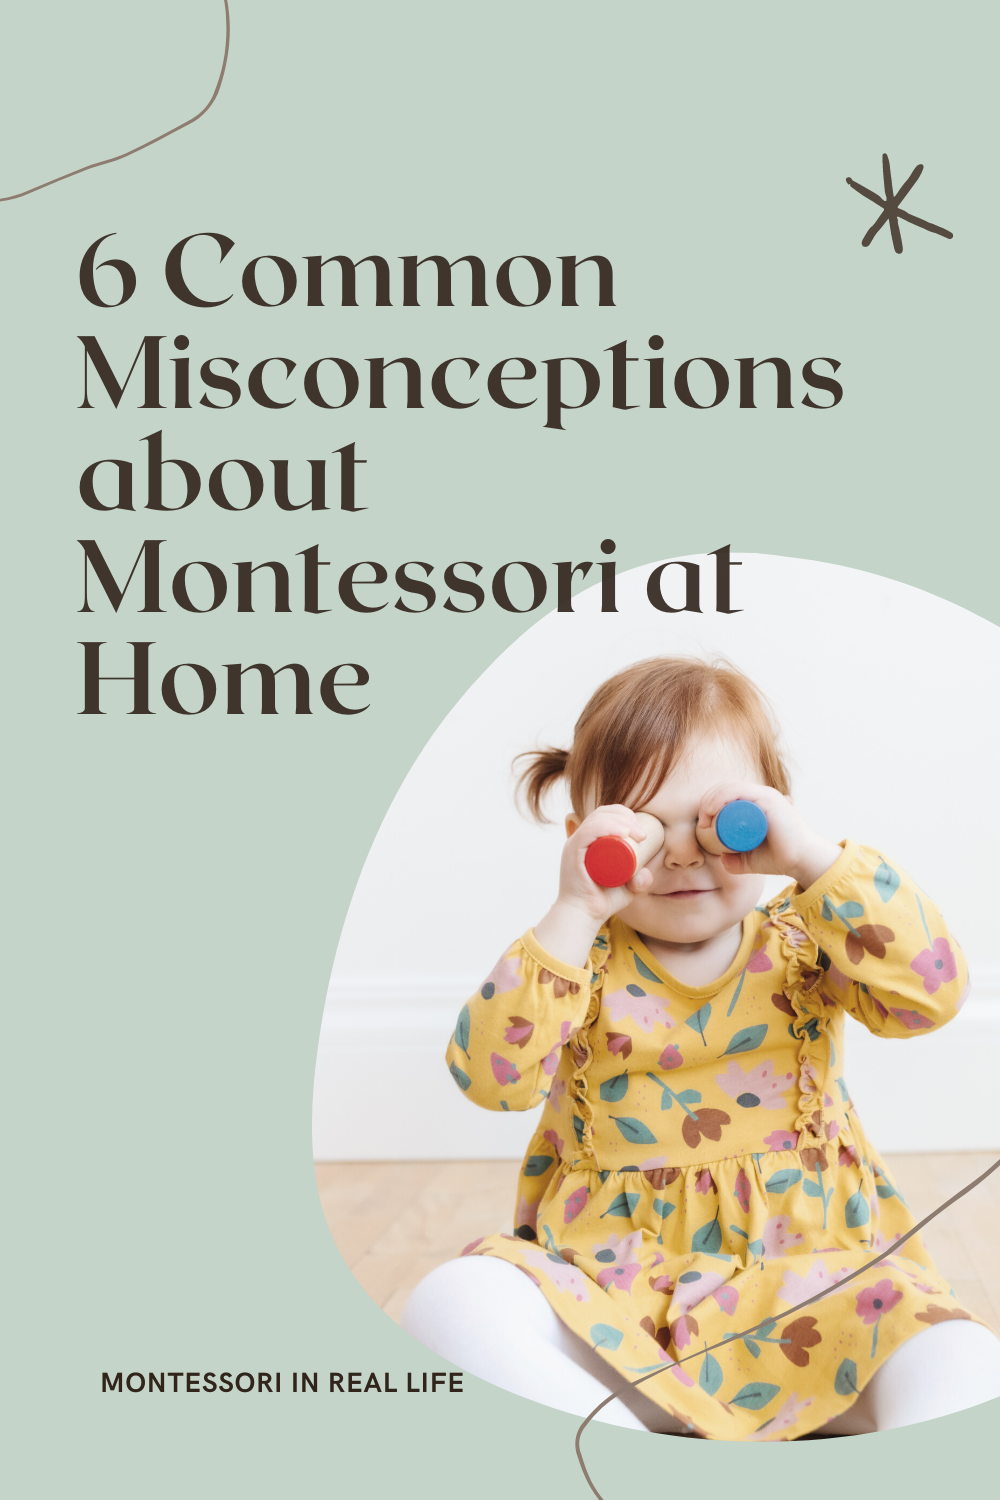 6 Common Misconceptions about Montessori at Home